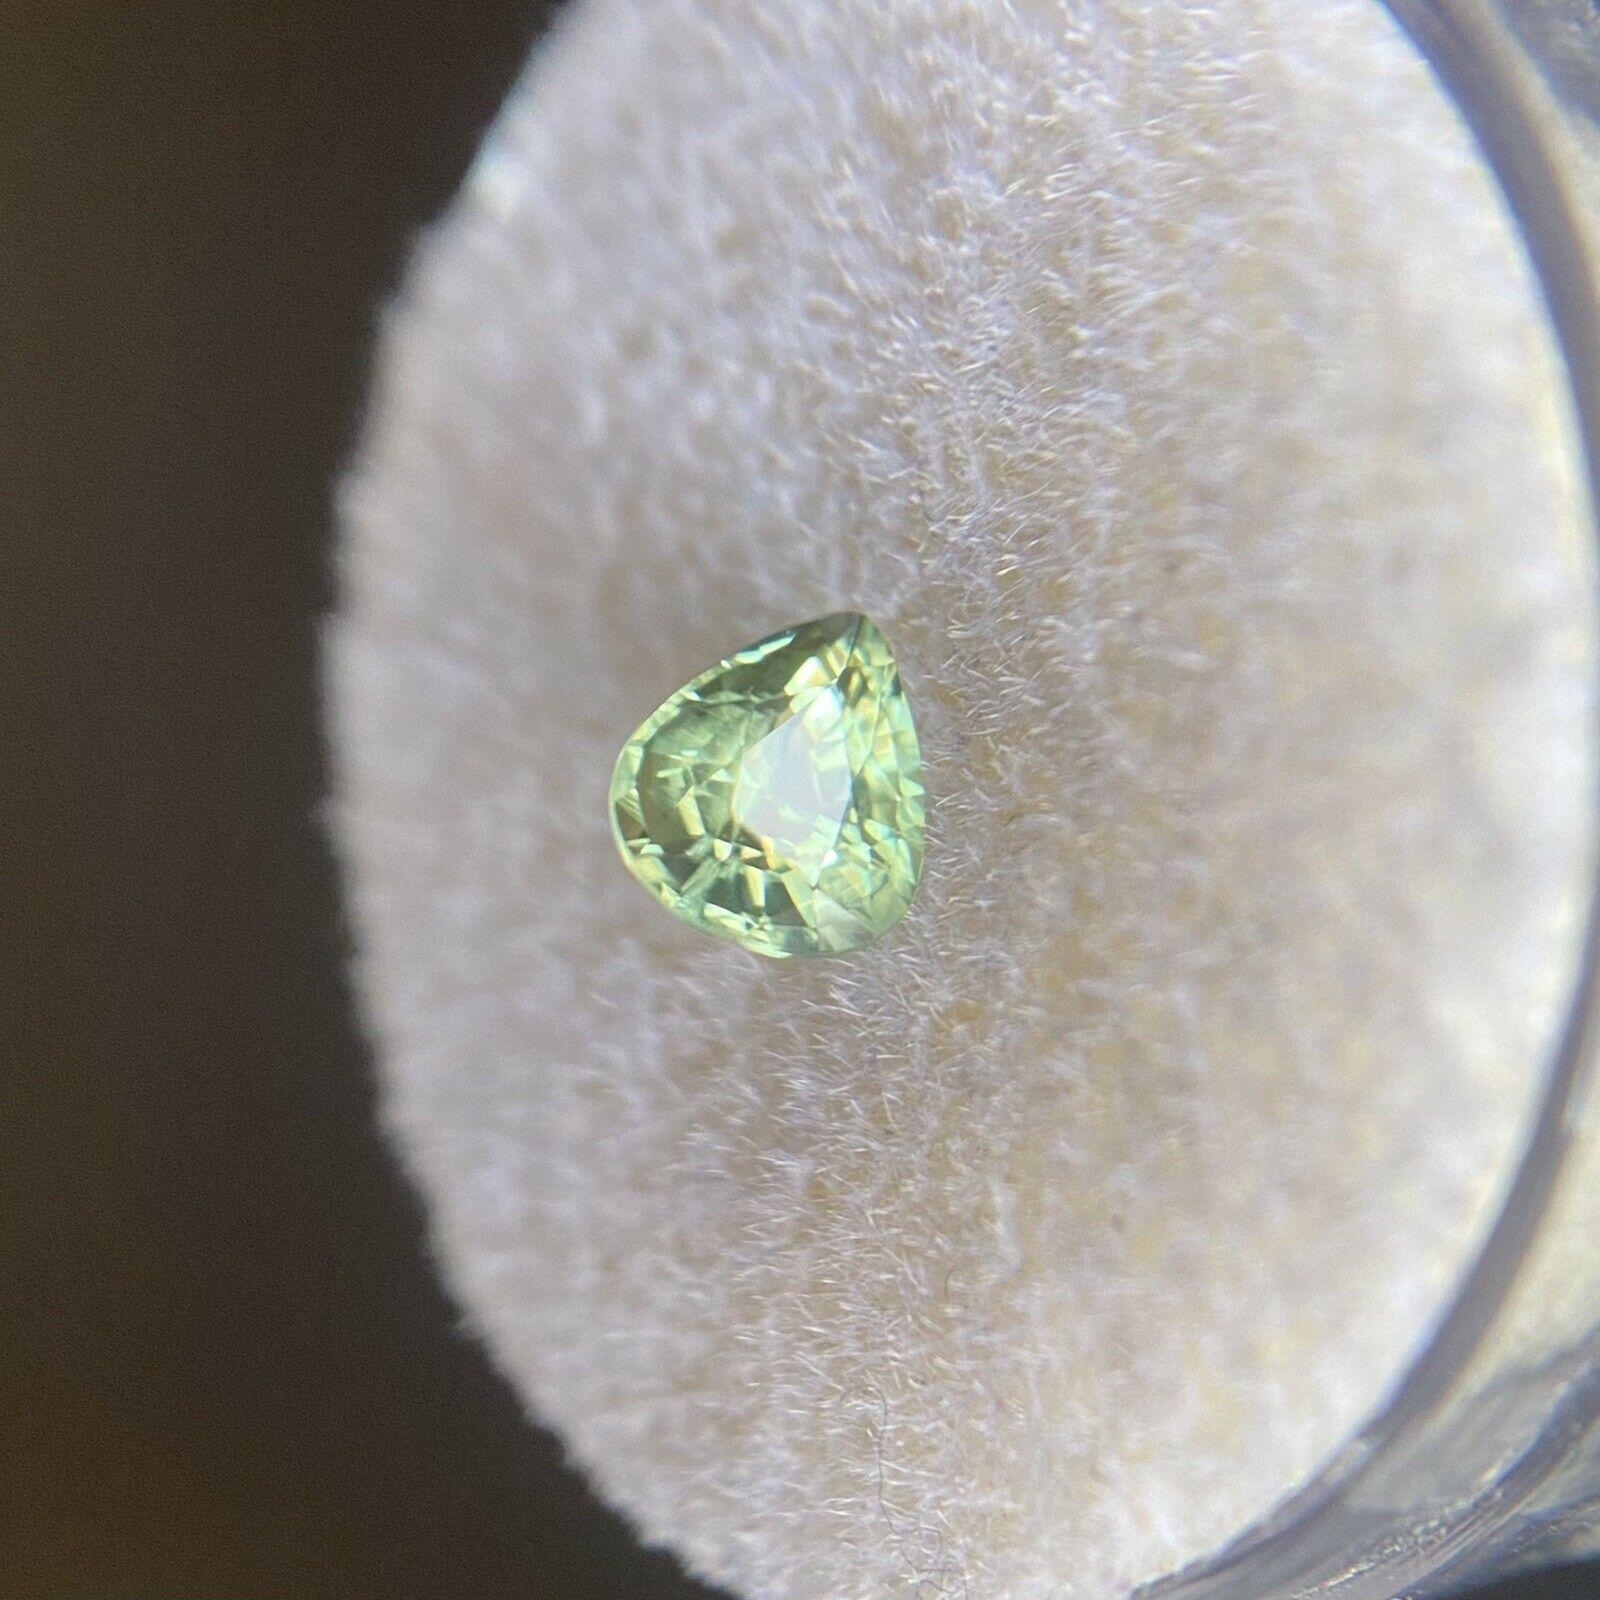 Vivid Green Australia Sapphire 0.76ct Pear Cut Loose Gem 5.3 x 5mm

Natural Green Australian Sapphire Gemstone. 
0.76 Carat with a beautiful light yellowish green colour and very good clarity, a very clean stone with only some small natural